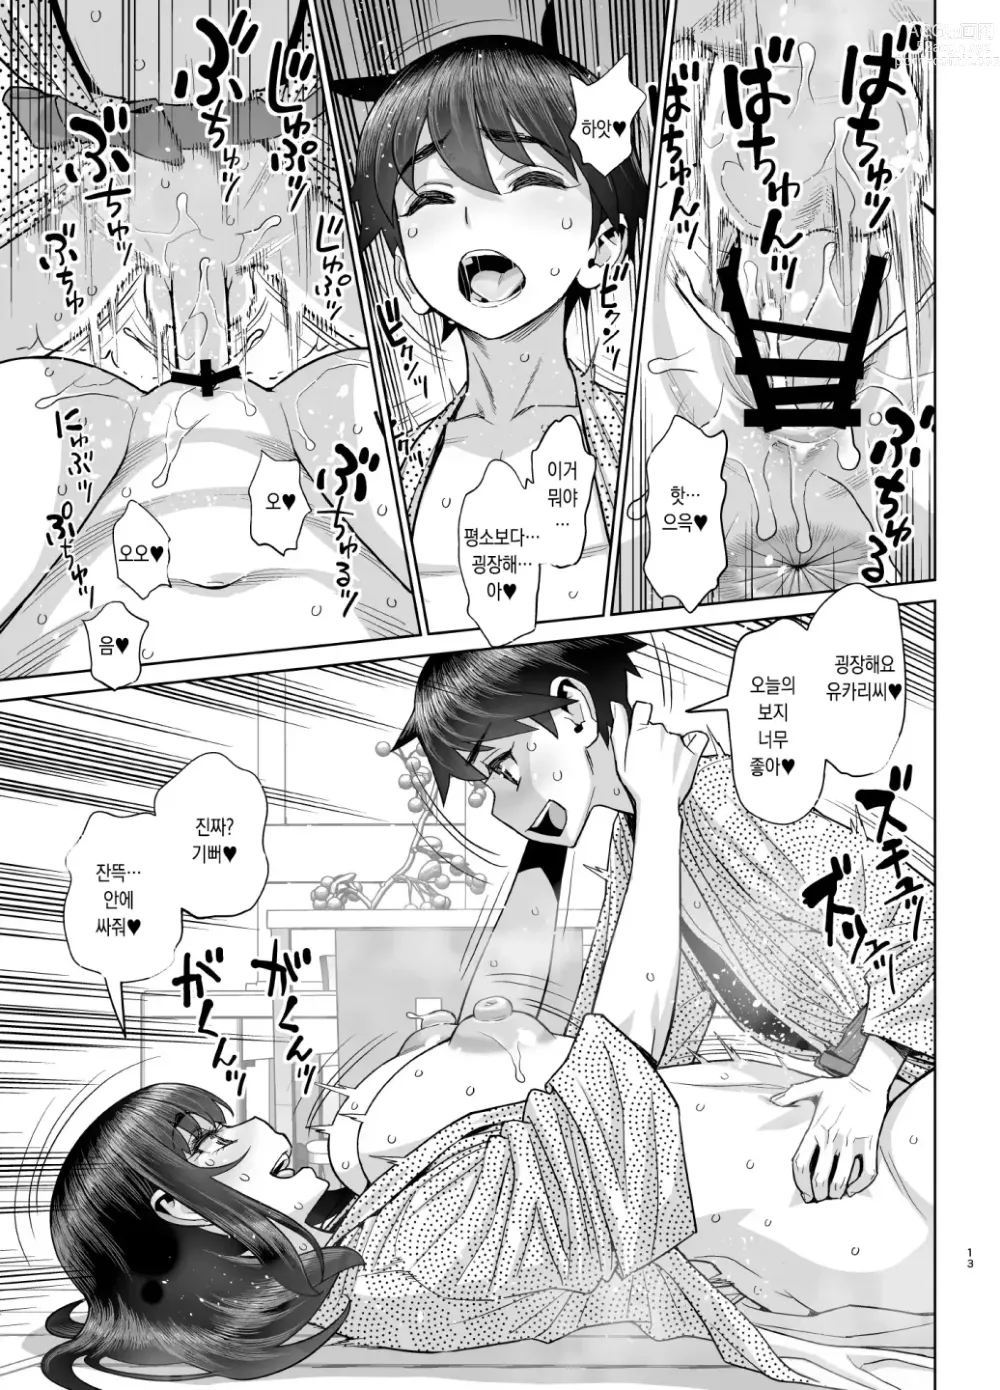 Page 13 of doujinshi 첫숙박 섹스